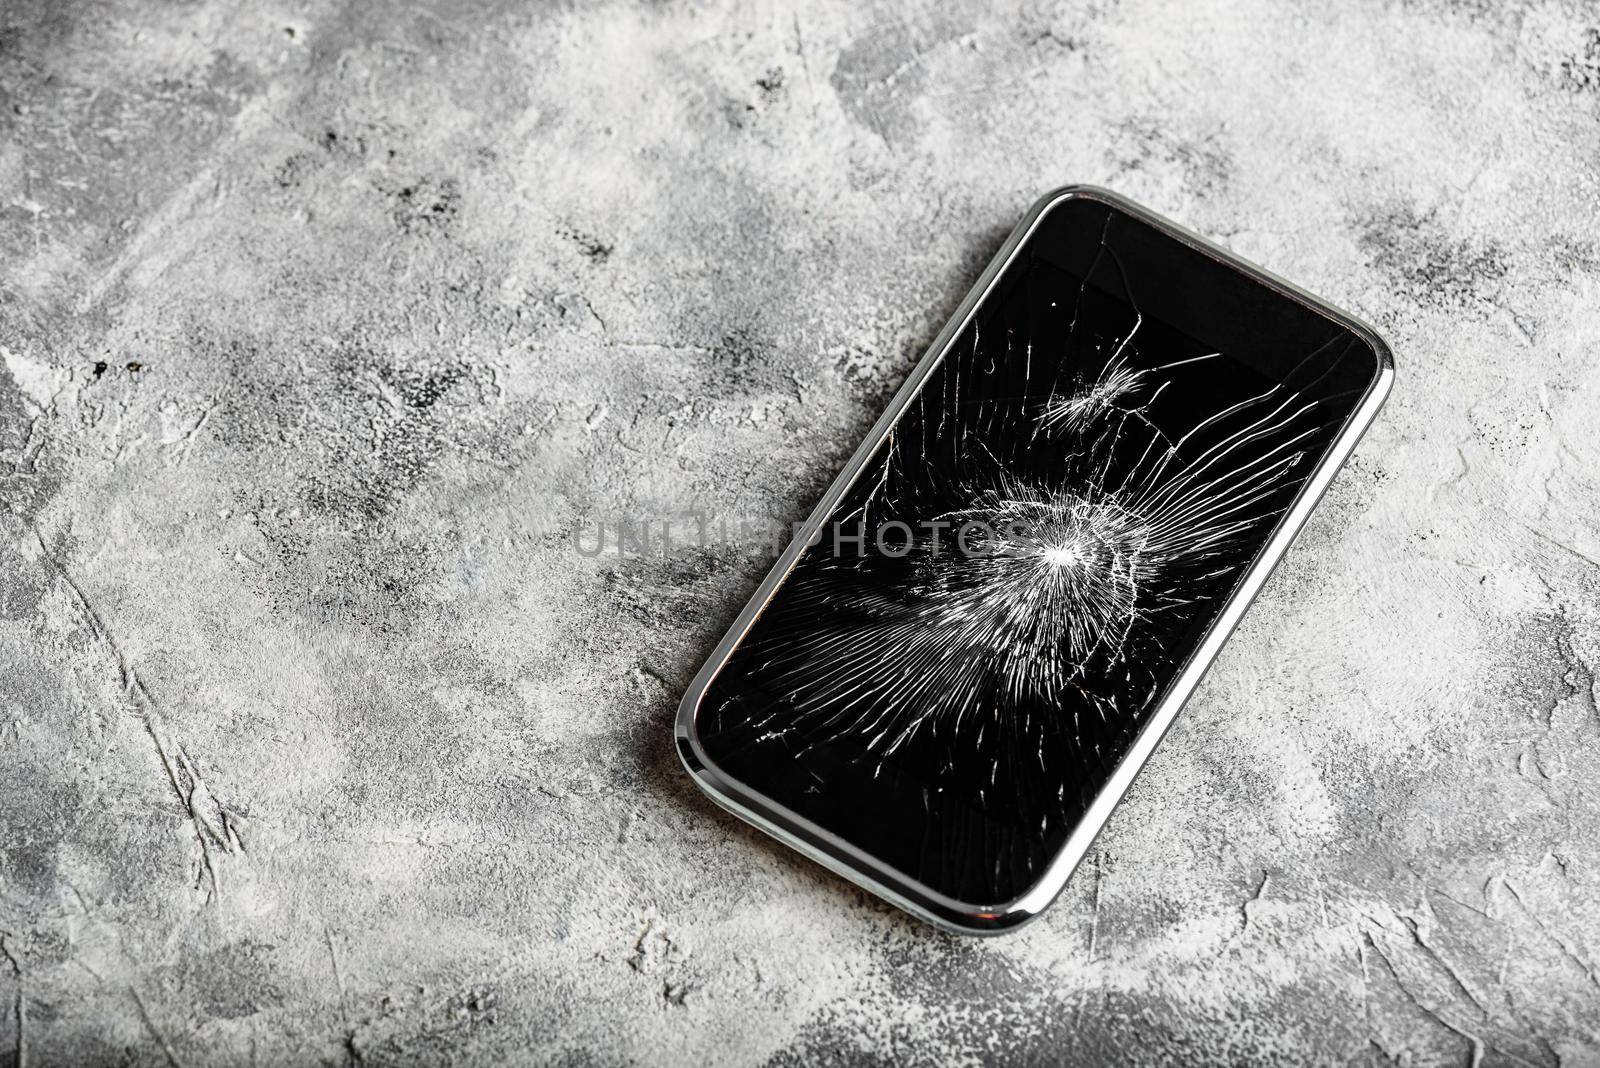 Smartphone with cracked screen over concrete background